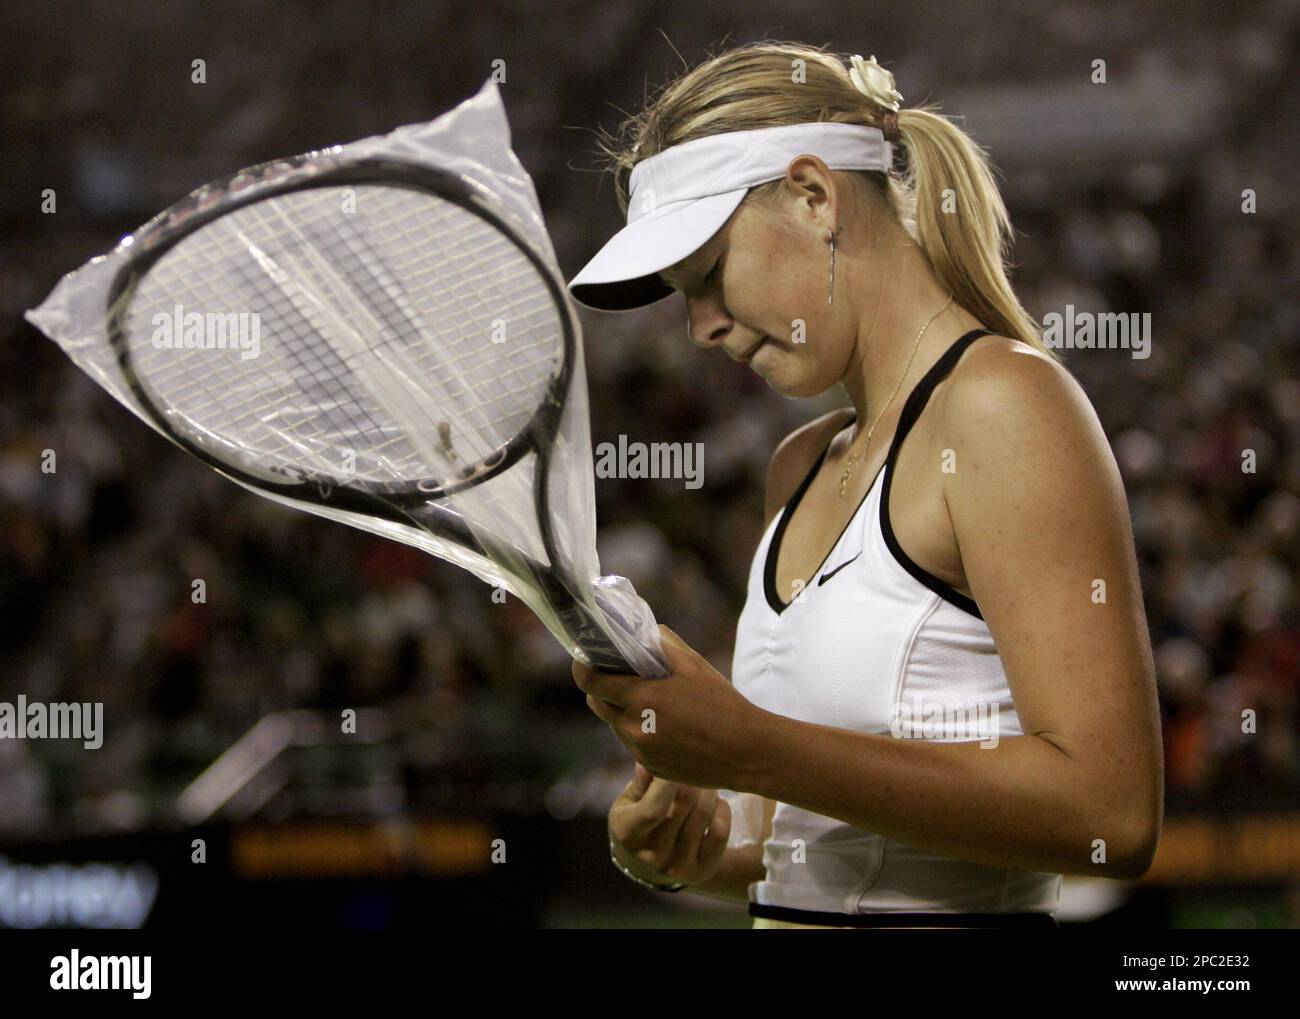 Maria Sharapova of Russia holds a new racket during her women's singles  final match against Serena Williams of the U.S. at the Australian Open  tennis tournament in Melbourne, Australia, Saturday, Jan. 27,